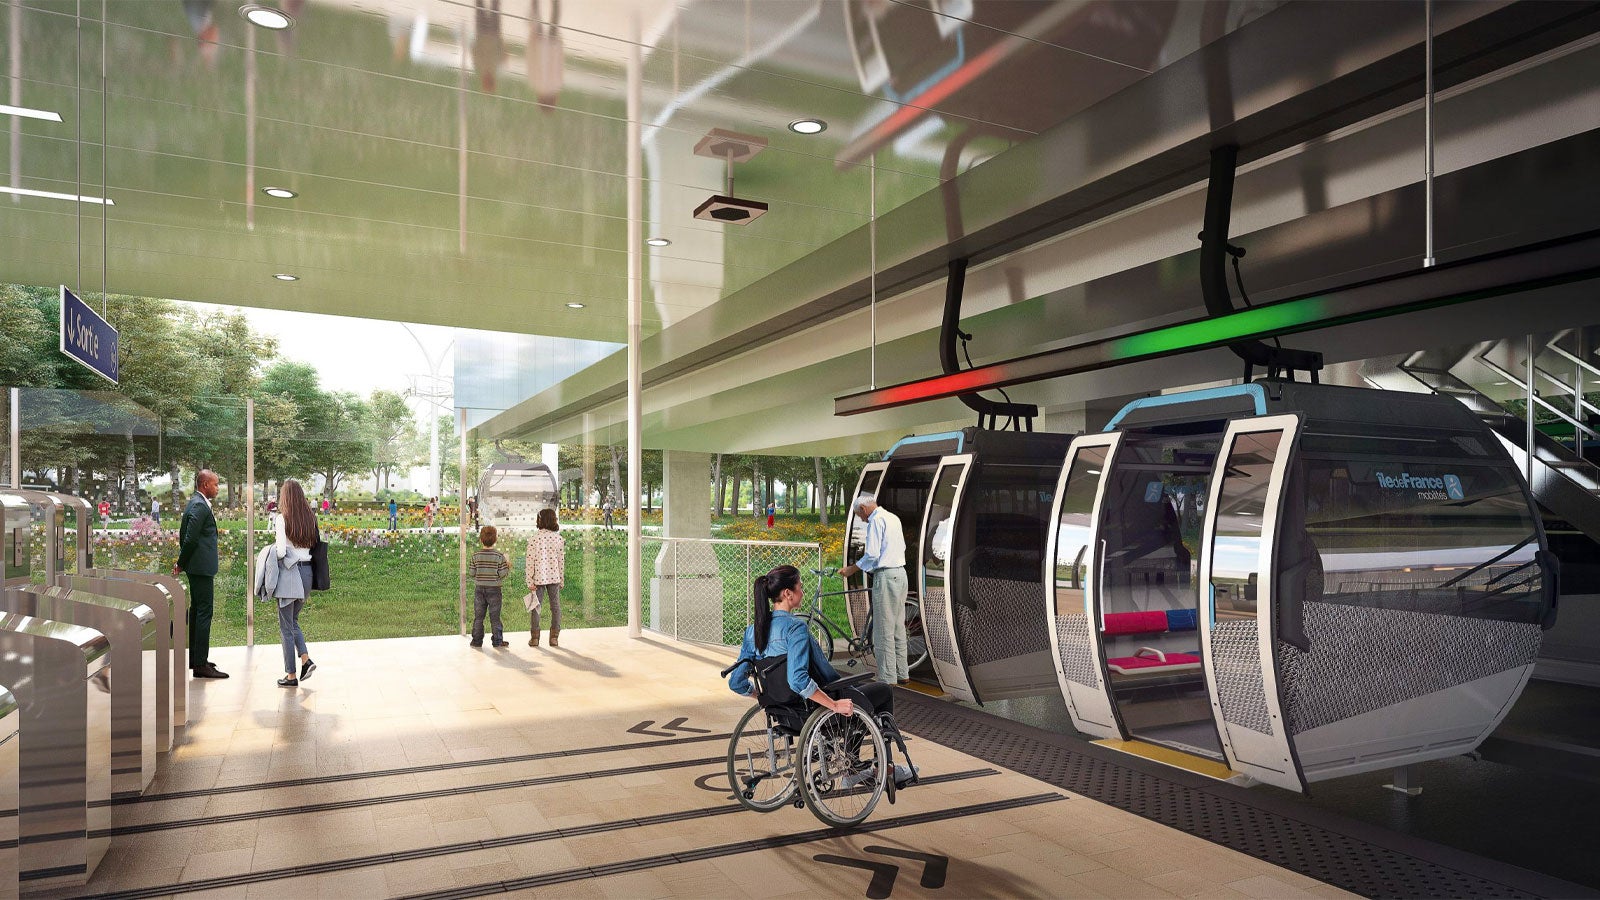 Subways Are Dead, Cable Cars Are the Future of City-Center Transport